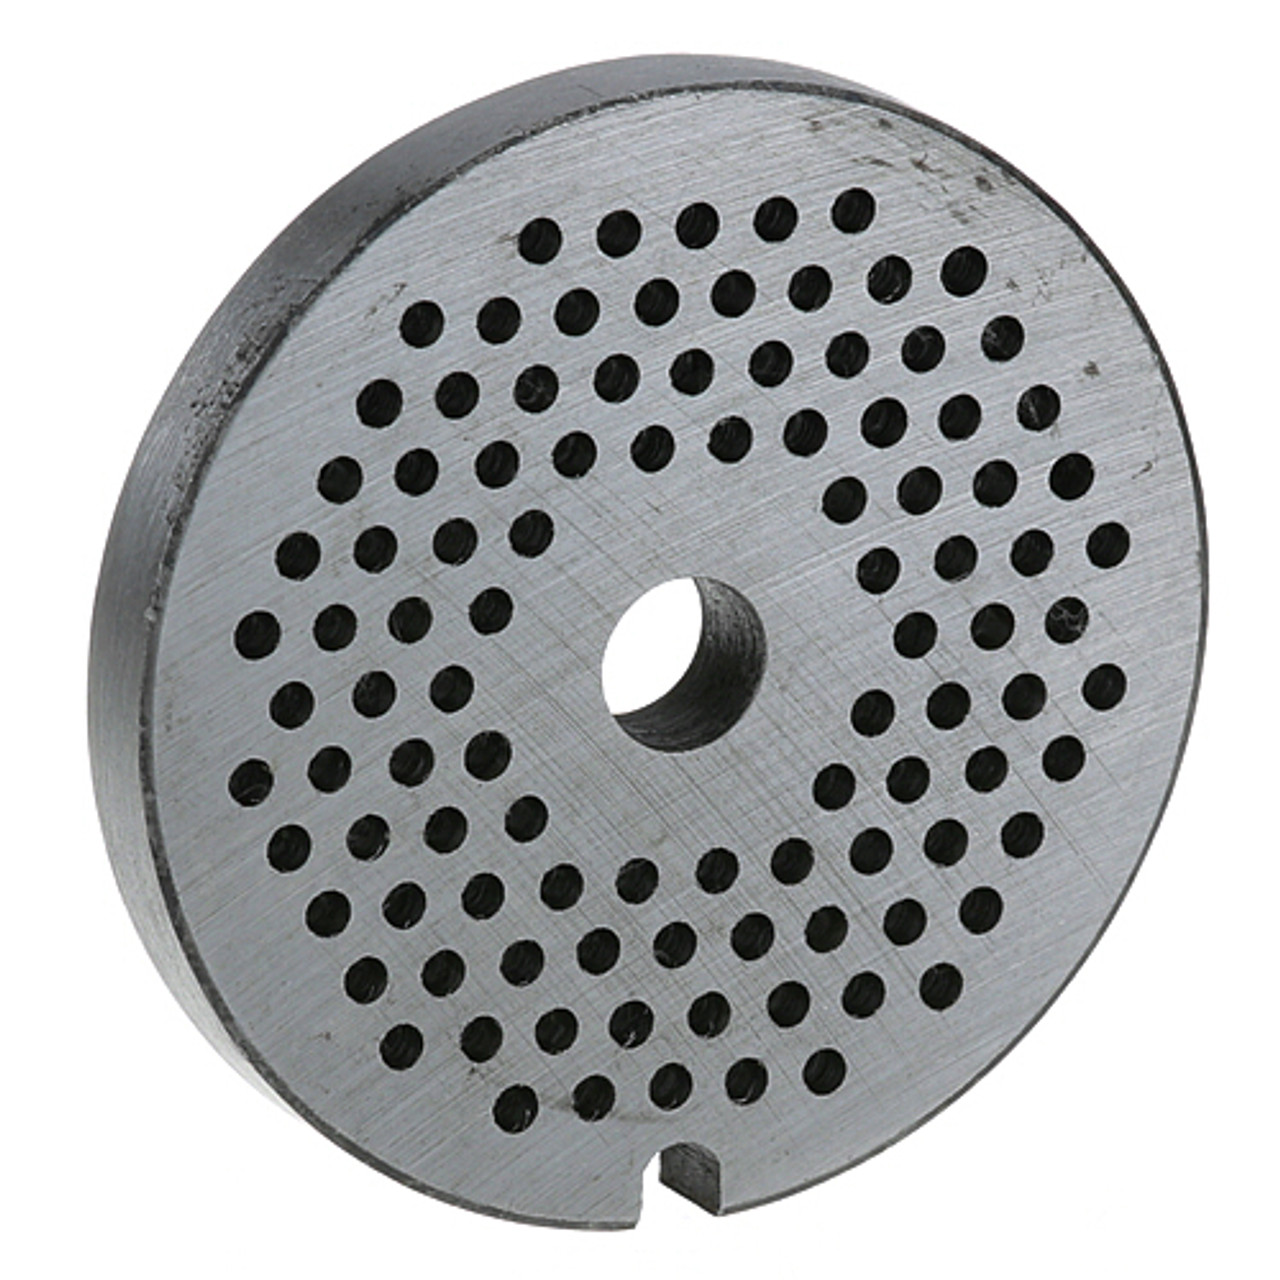 Grinder Plate - 1/8" - Replacement Part For Hobart 812GP 1-8"